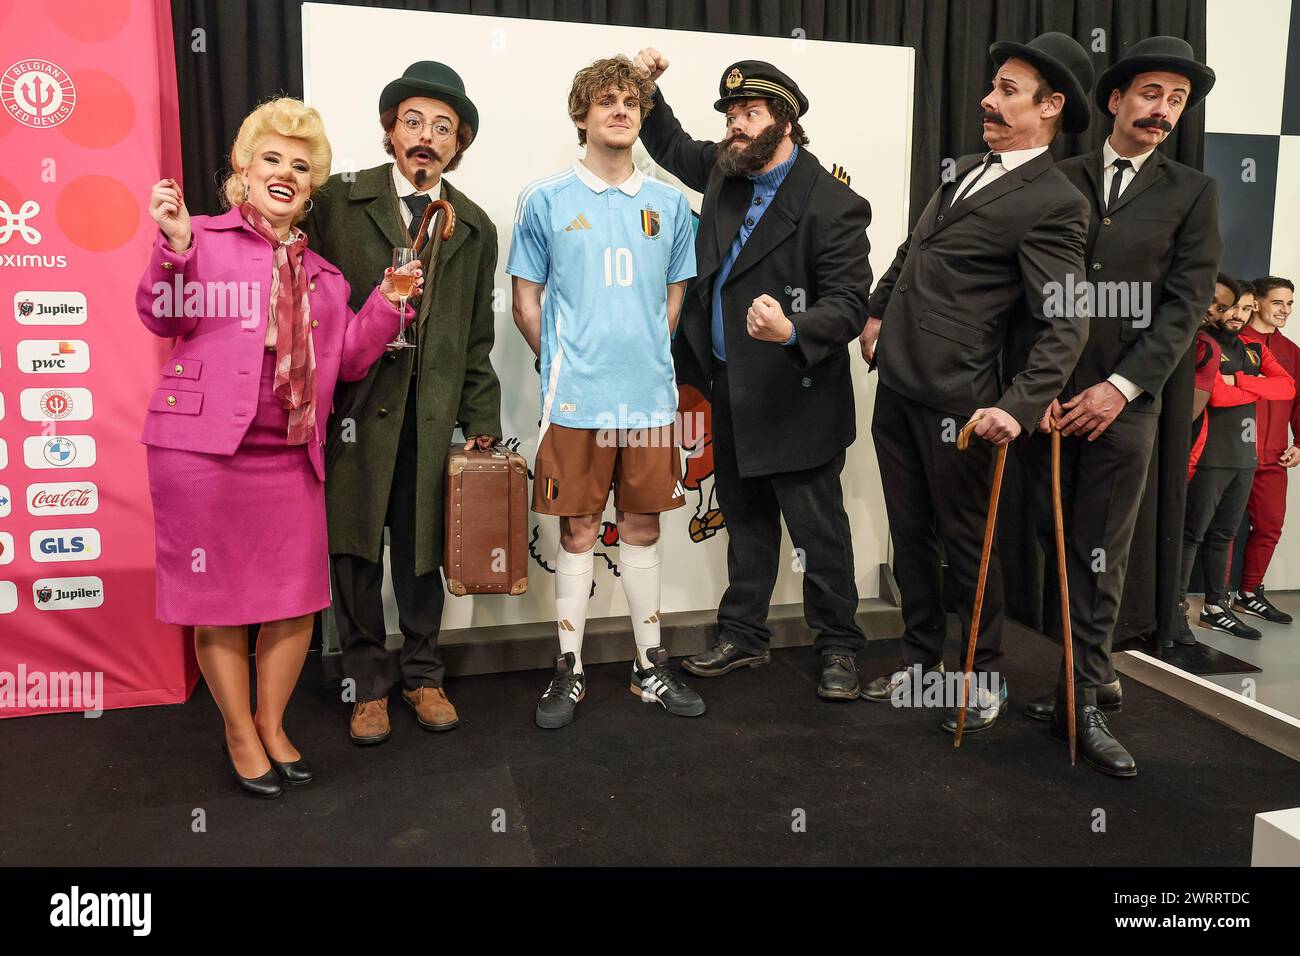 A model showing the away outfit referencing to Kuifje-Tintin, is surrounded by characters from the comic book series, such as singer Bianca Castafiore, Professor Calculus (Tournesol-Zonnebloem), Captain Haddock and detectives Thomson and Thompson (Jansen en Janssen - Dupont et Dupond) during a press conference of Belgian national soccer team Red Devils to present the new shirts for the UEFA Euro 2024 European Championship, Thursday 14 March 2024, at the Musee Herge in Louvain-la-Neuve. The new outfit, with light blue shirt with white collar, combined with brown shorts, refers to the iconic out Stock Photo